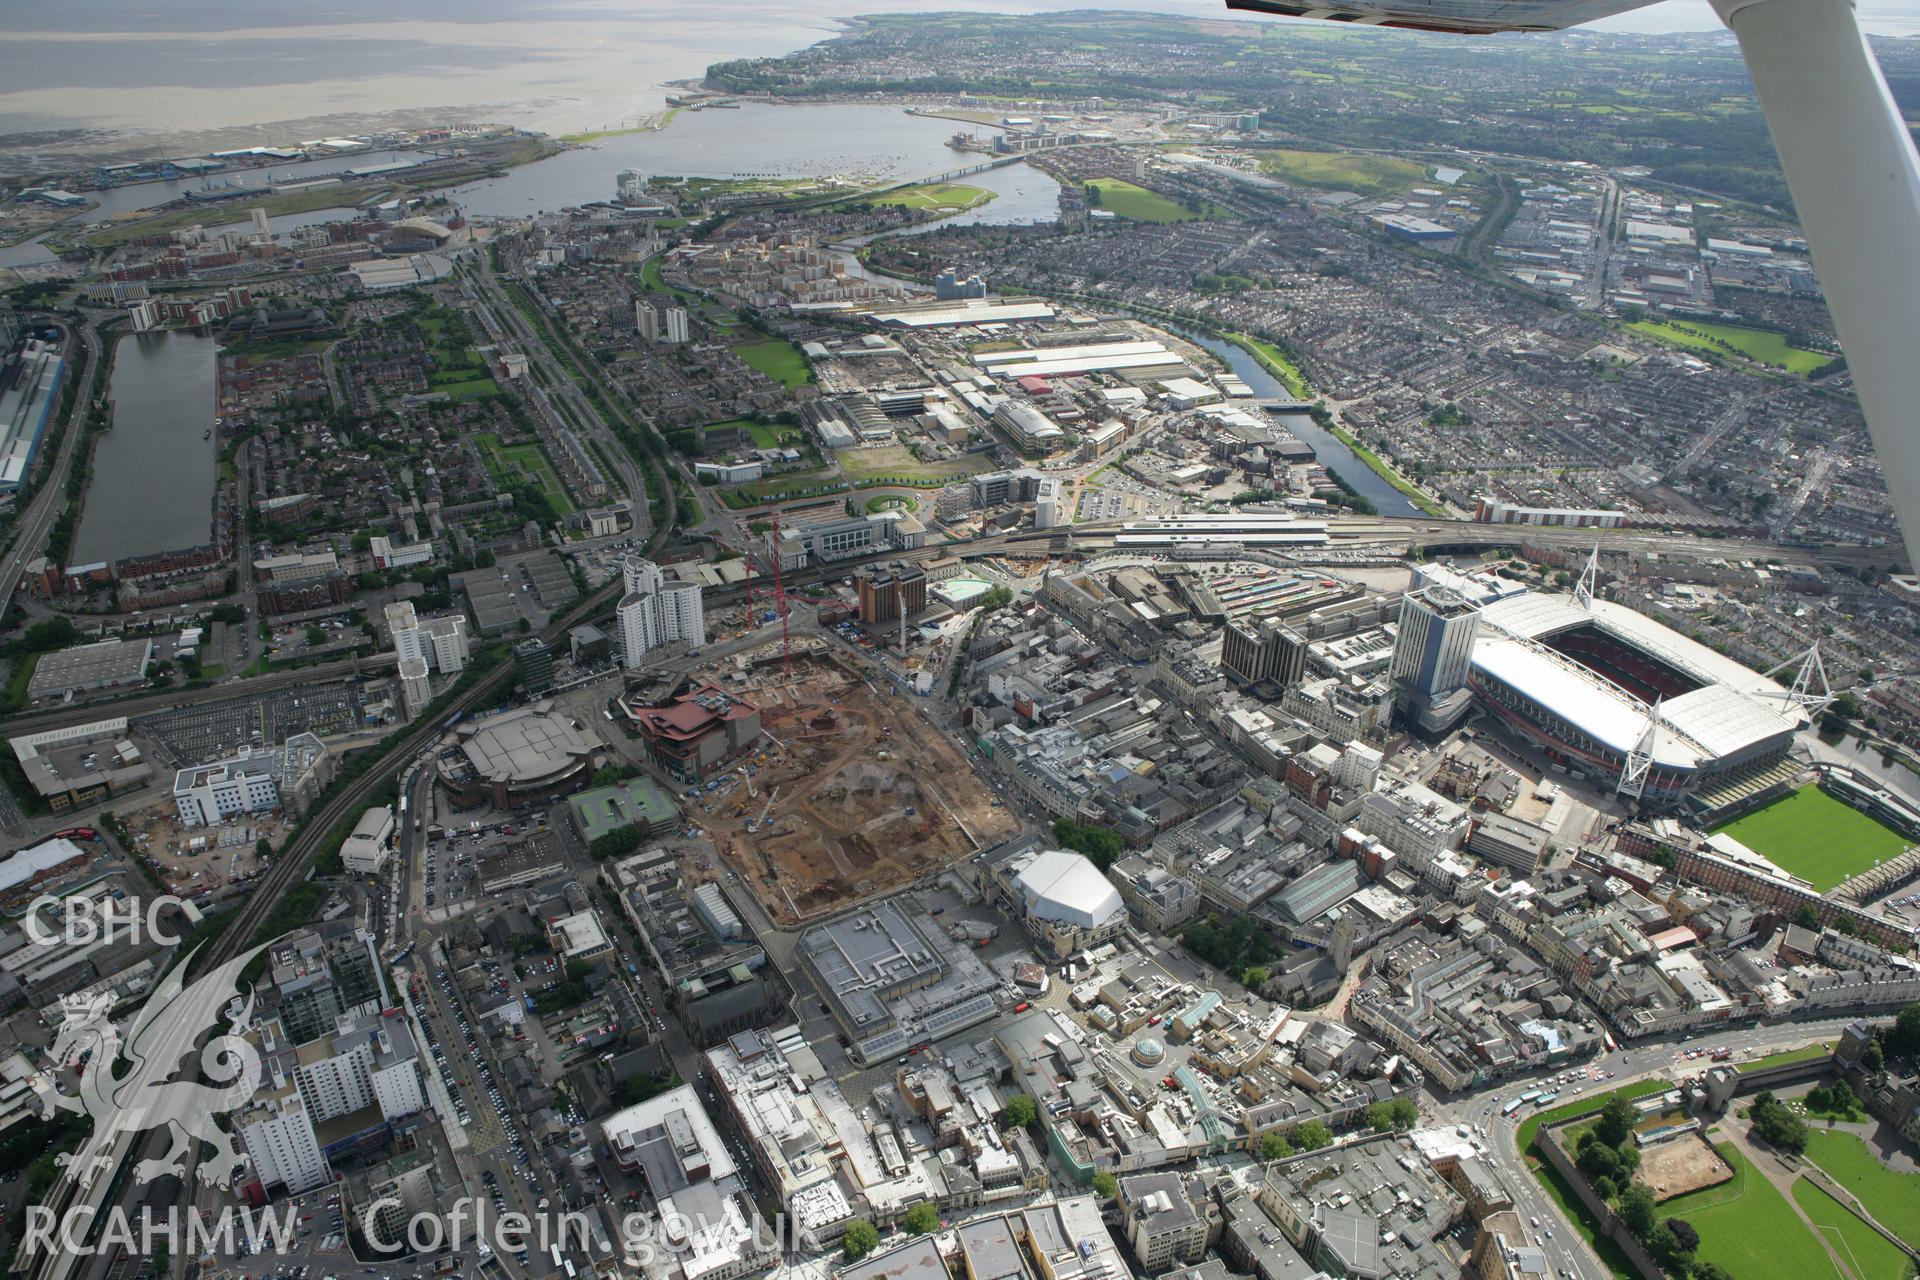 RCAHMW colour oblique aerial photograph of re-development in the centre of Cardiff. Taken on 30 July 2007 by Toby Driver